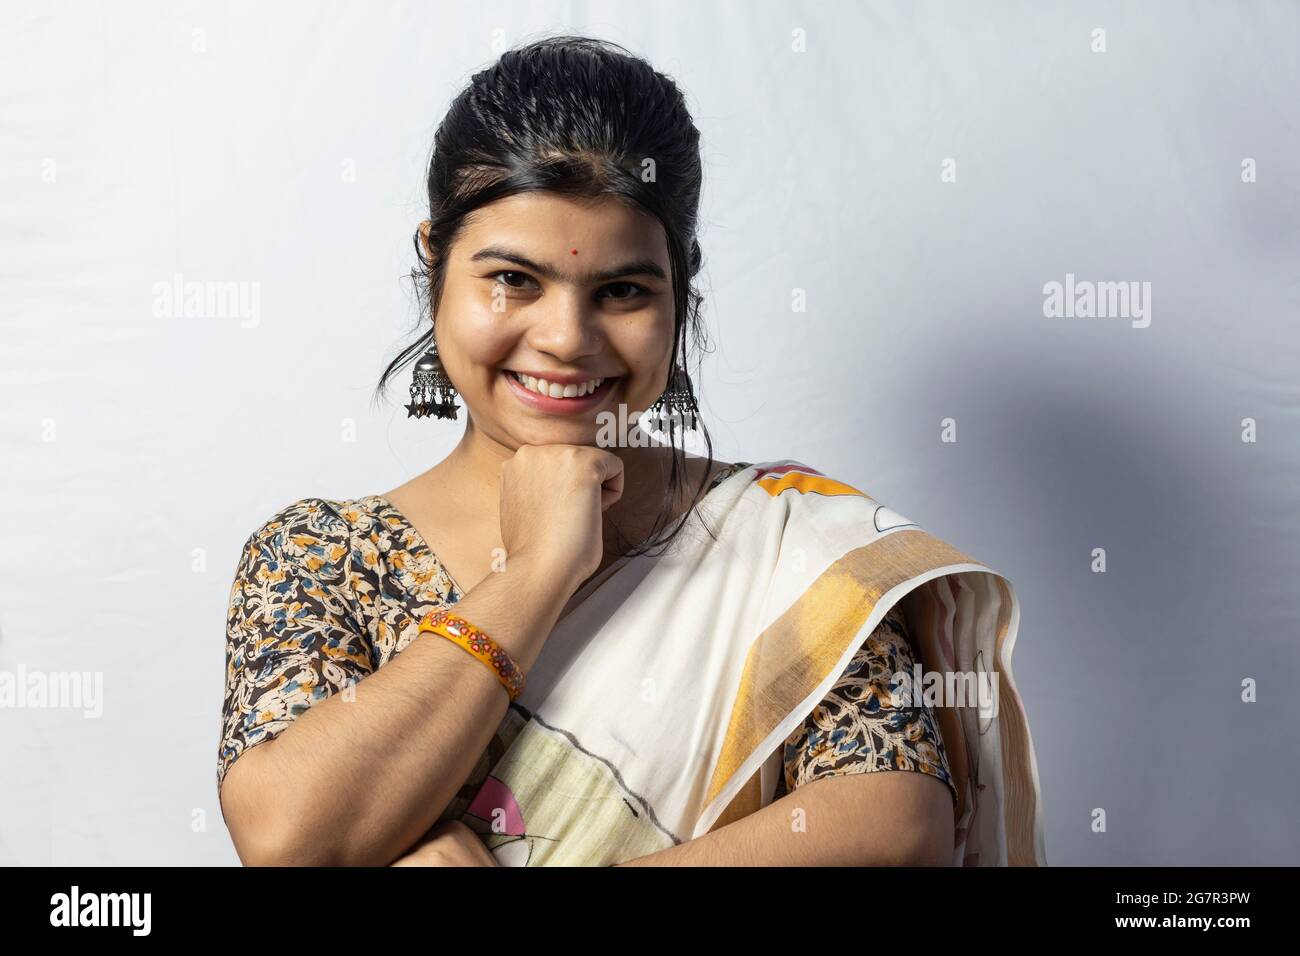 isolated on white background an indian female in saree smiles to camera with hand under chin pose on white background 2G7R3PW